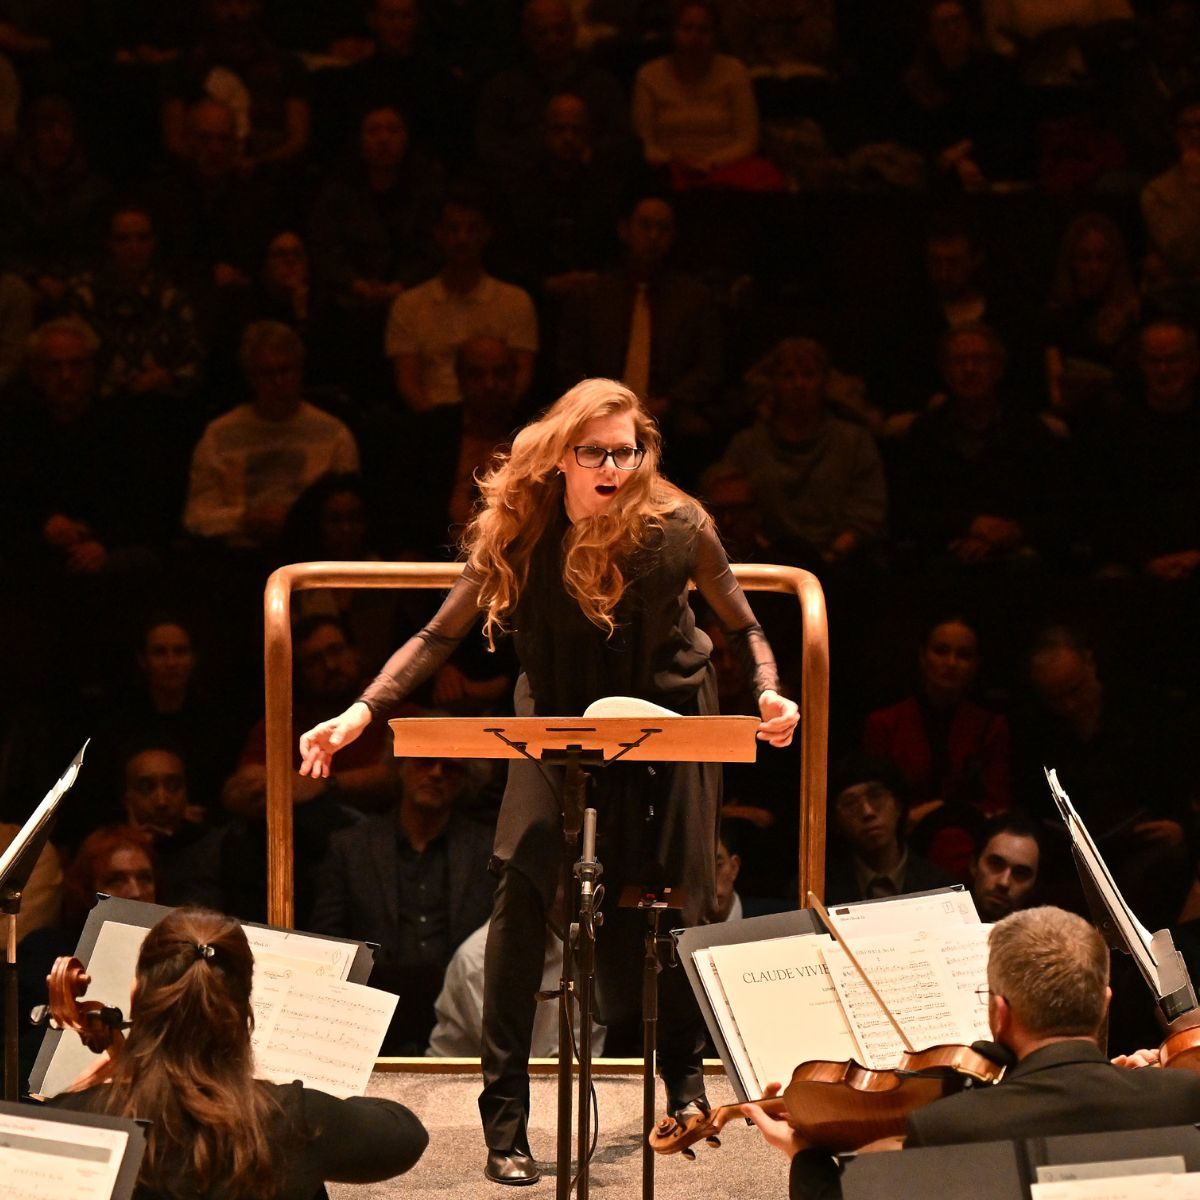 Barbara Hannigan conducting the LSO on the Barbican stage, pictured face-on